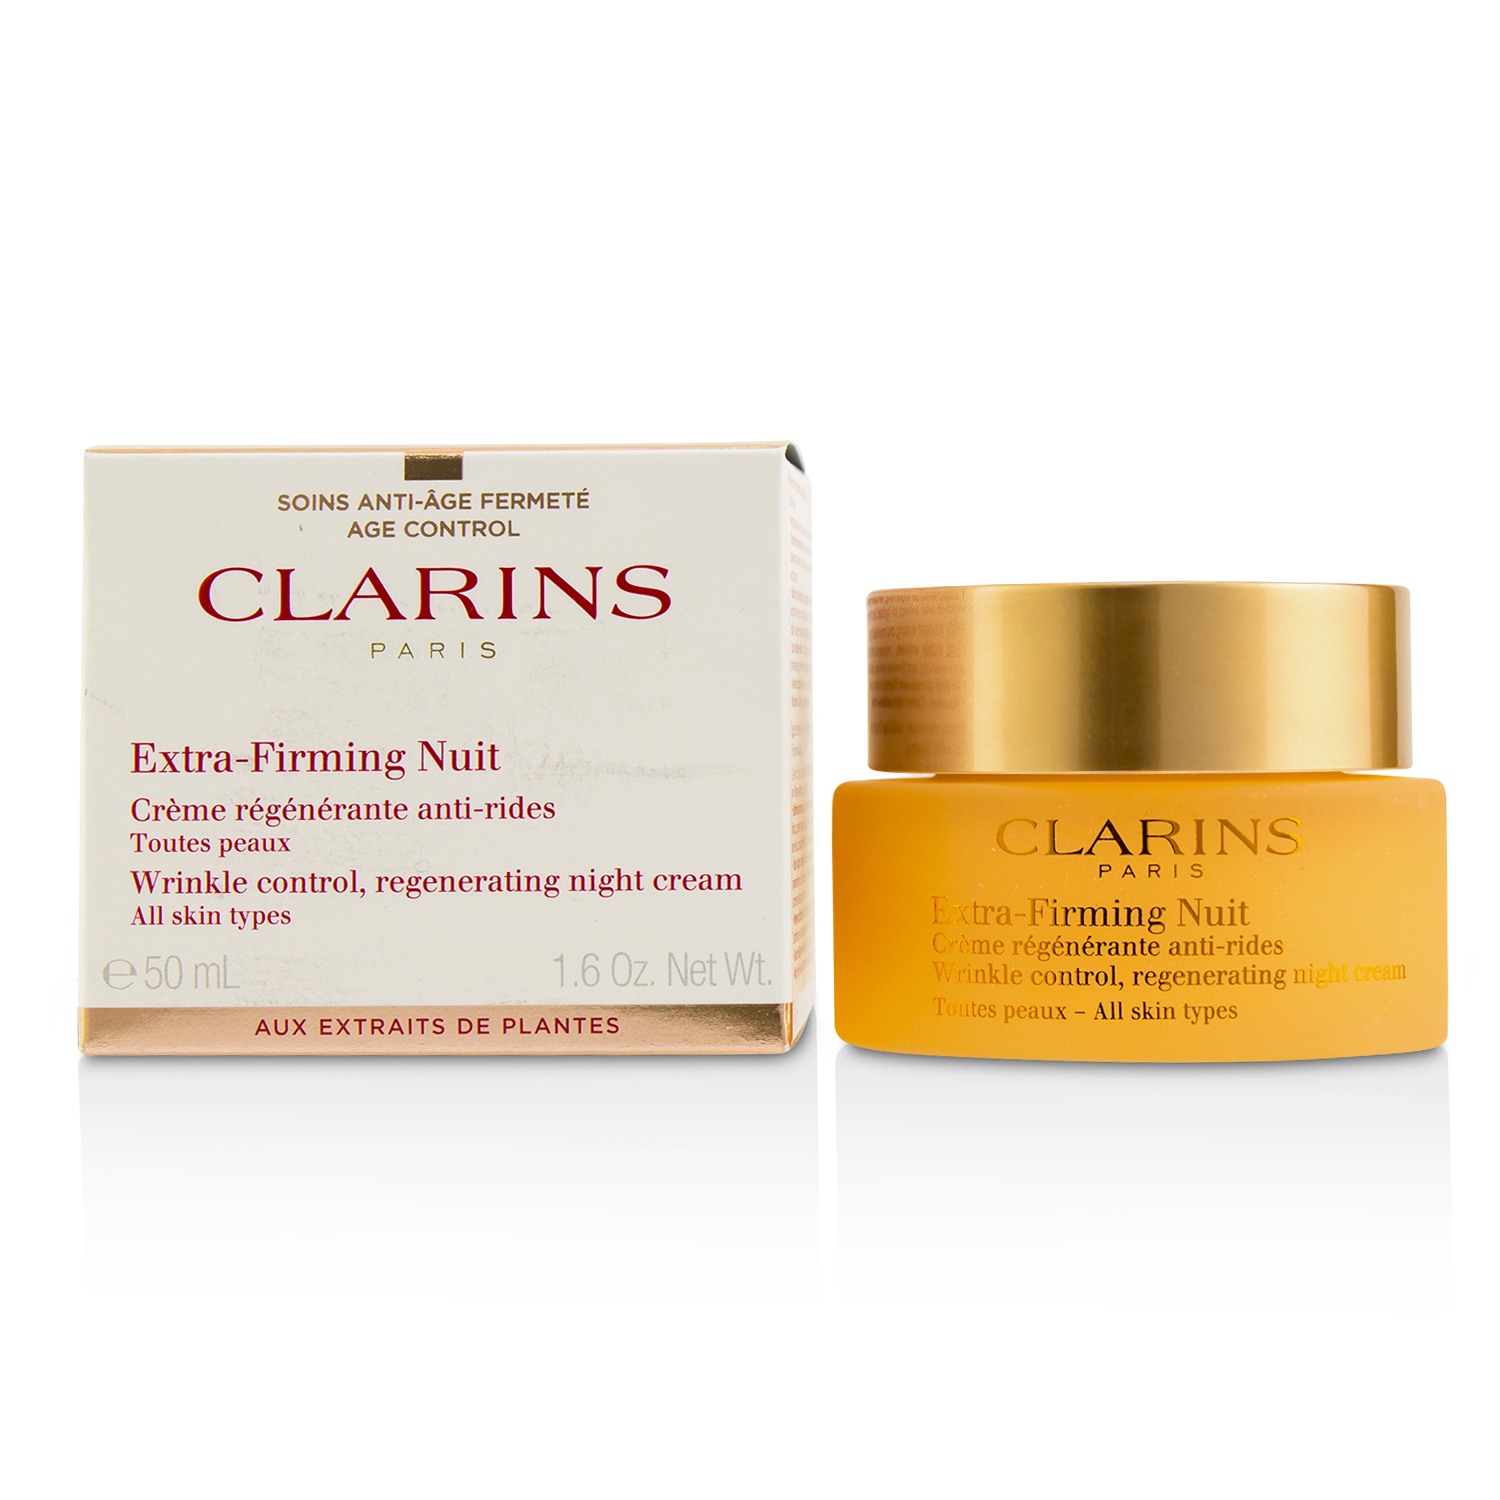 Extra-Firming Nuit Wrinkle Control Regenerating Night Cream - All Skin Types Clarins Image